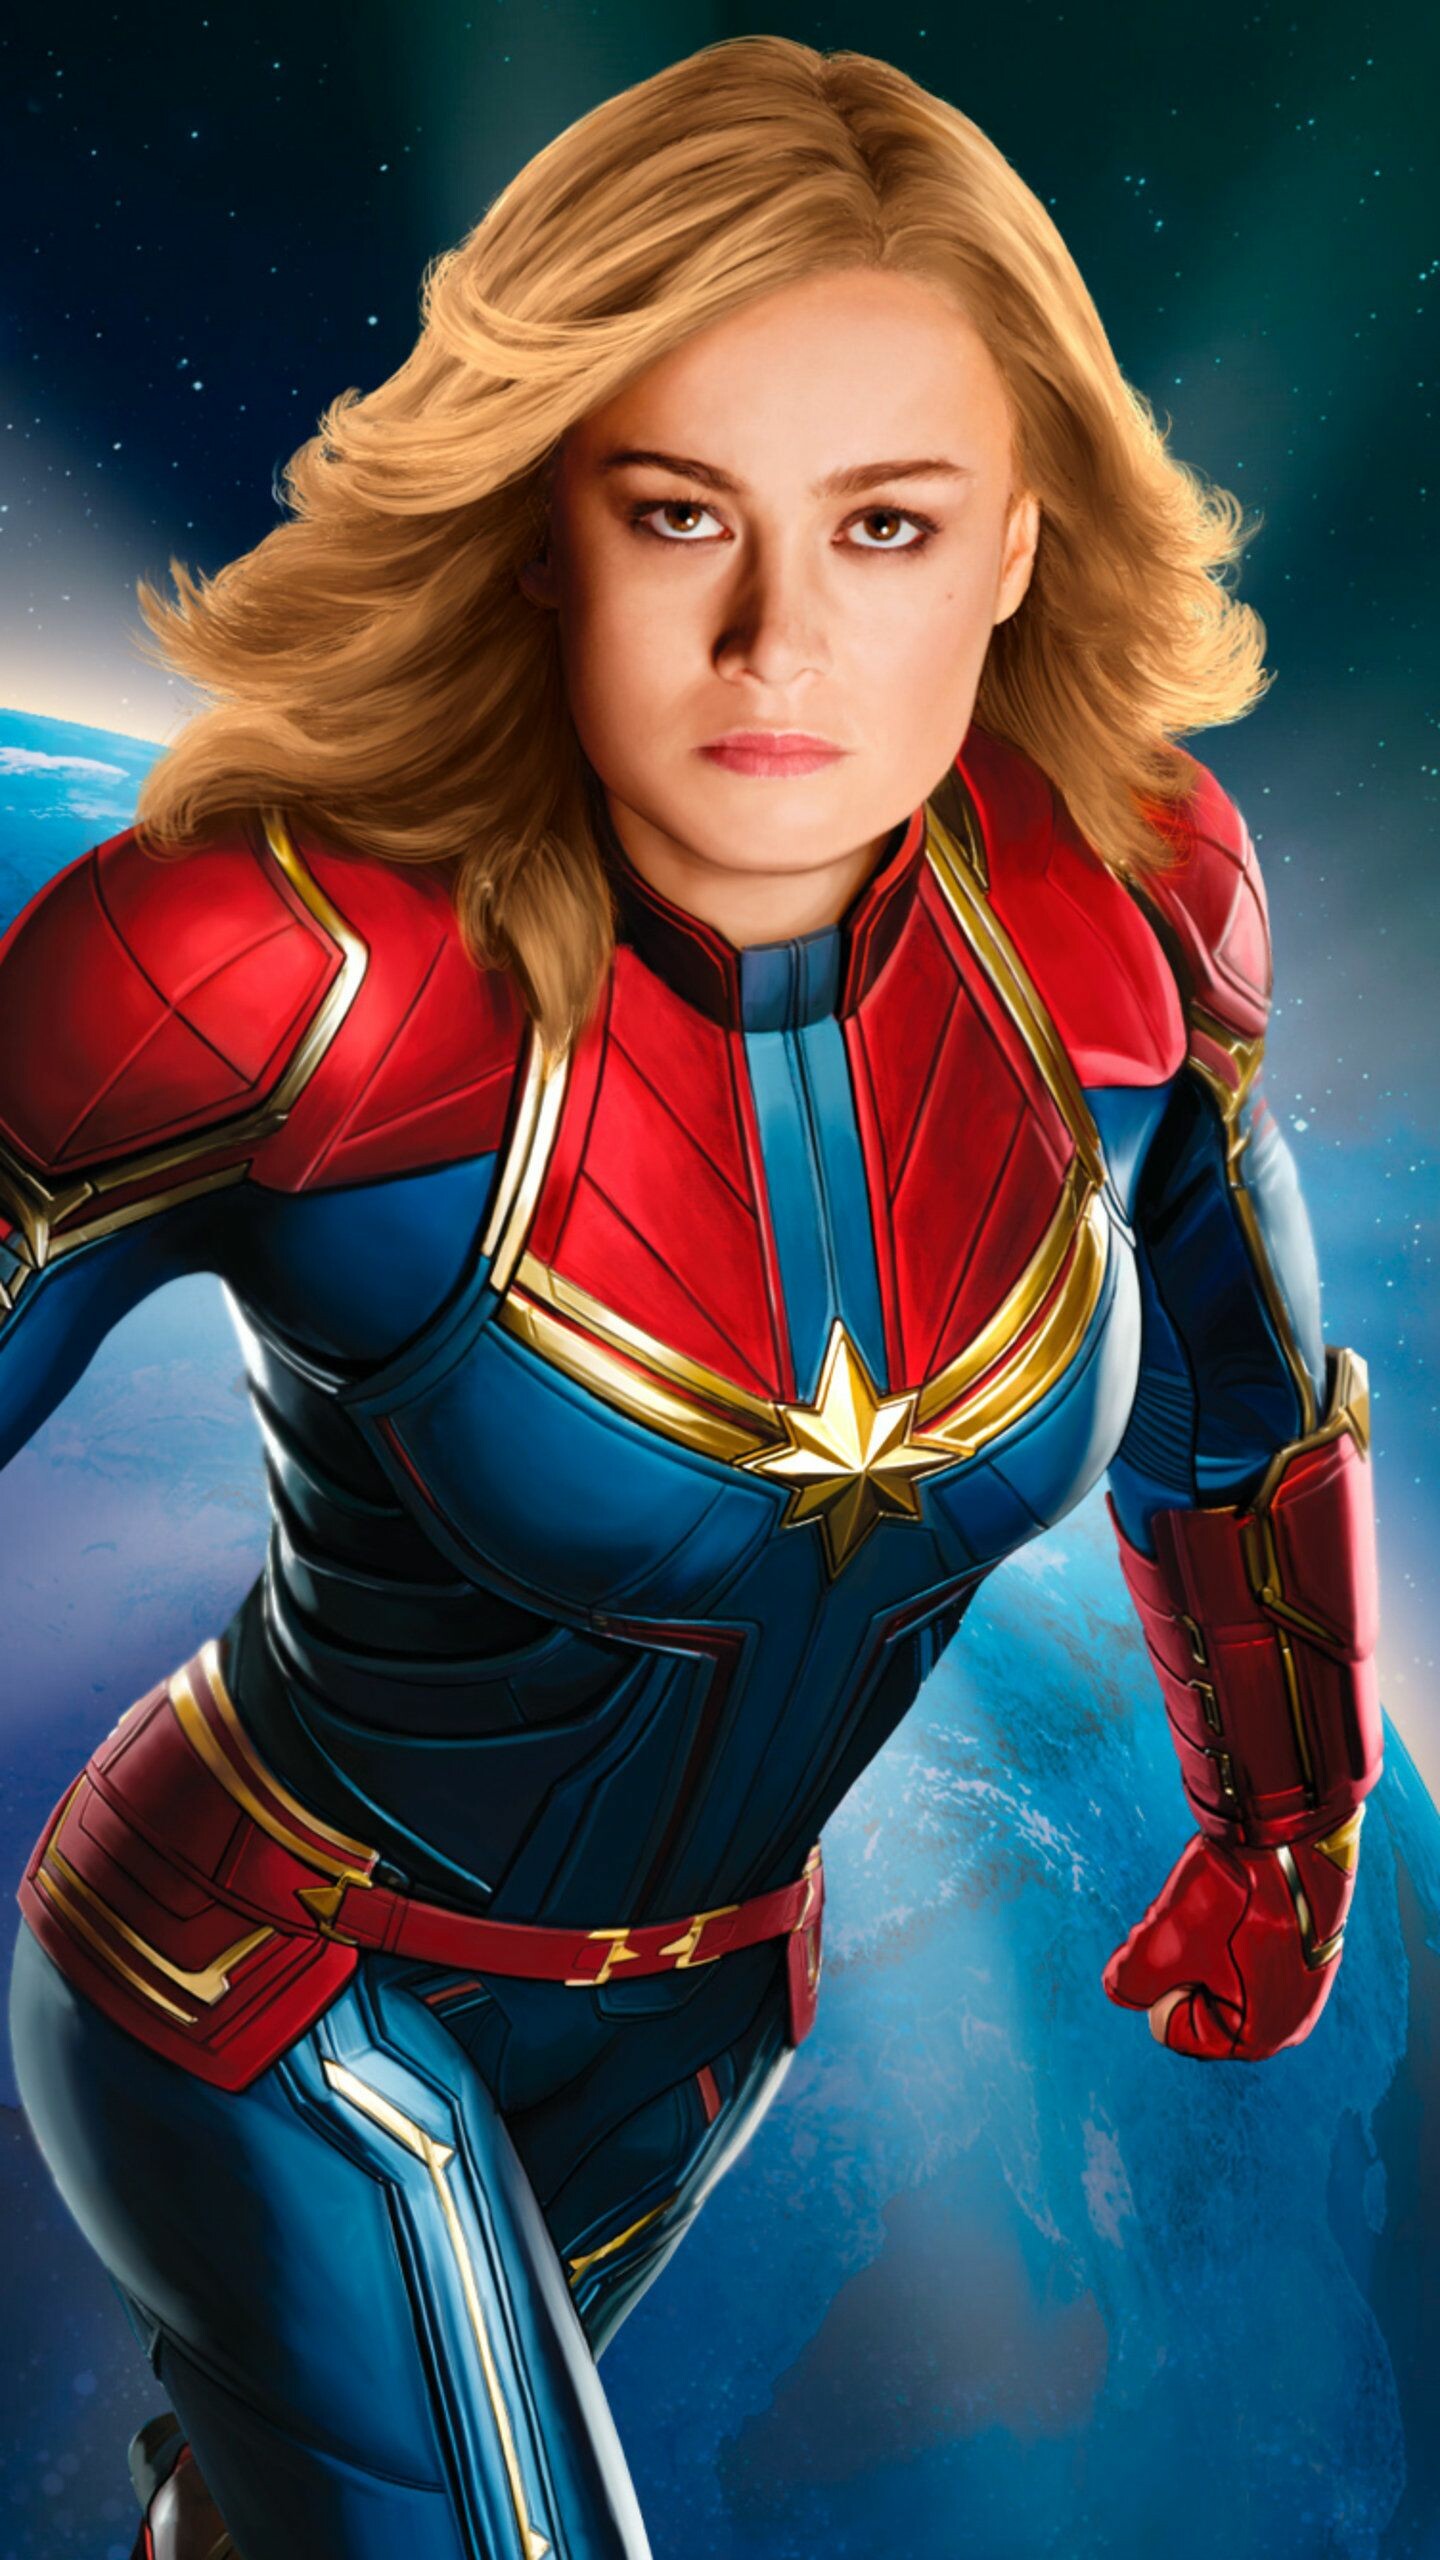 Marvel Girls: Carol Danvers, was exposed to the cosmic energy of the Tesseract. 1440x2560 HD Wallpaper.